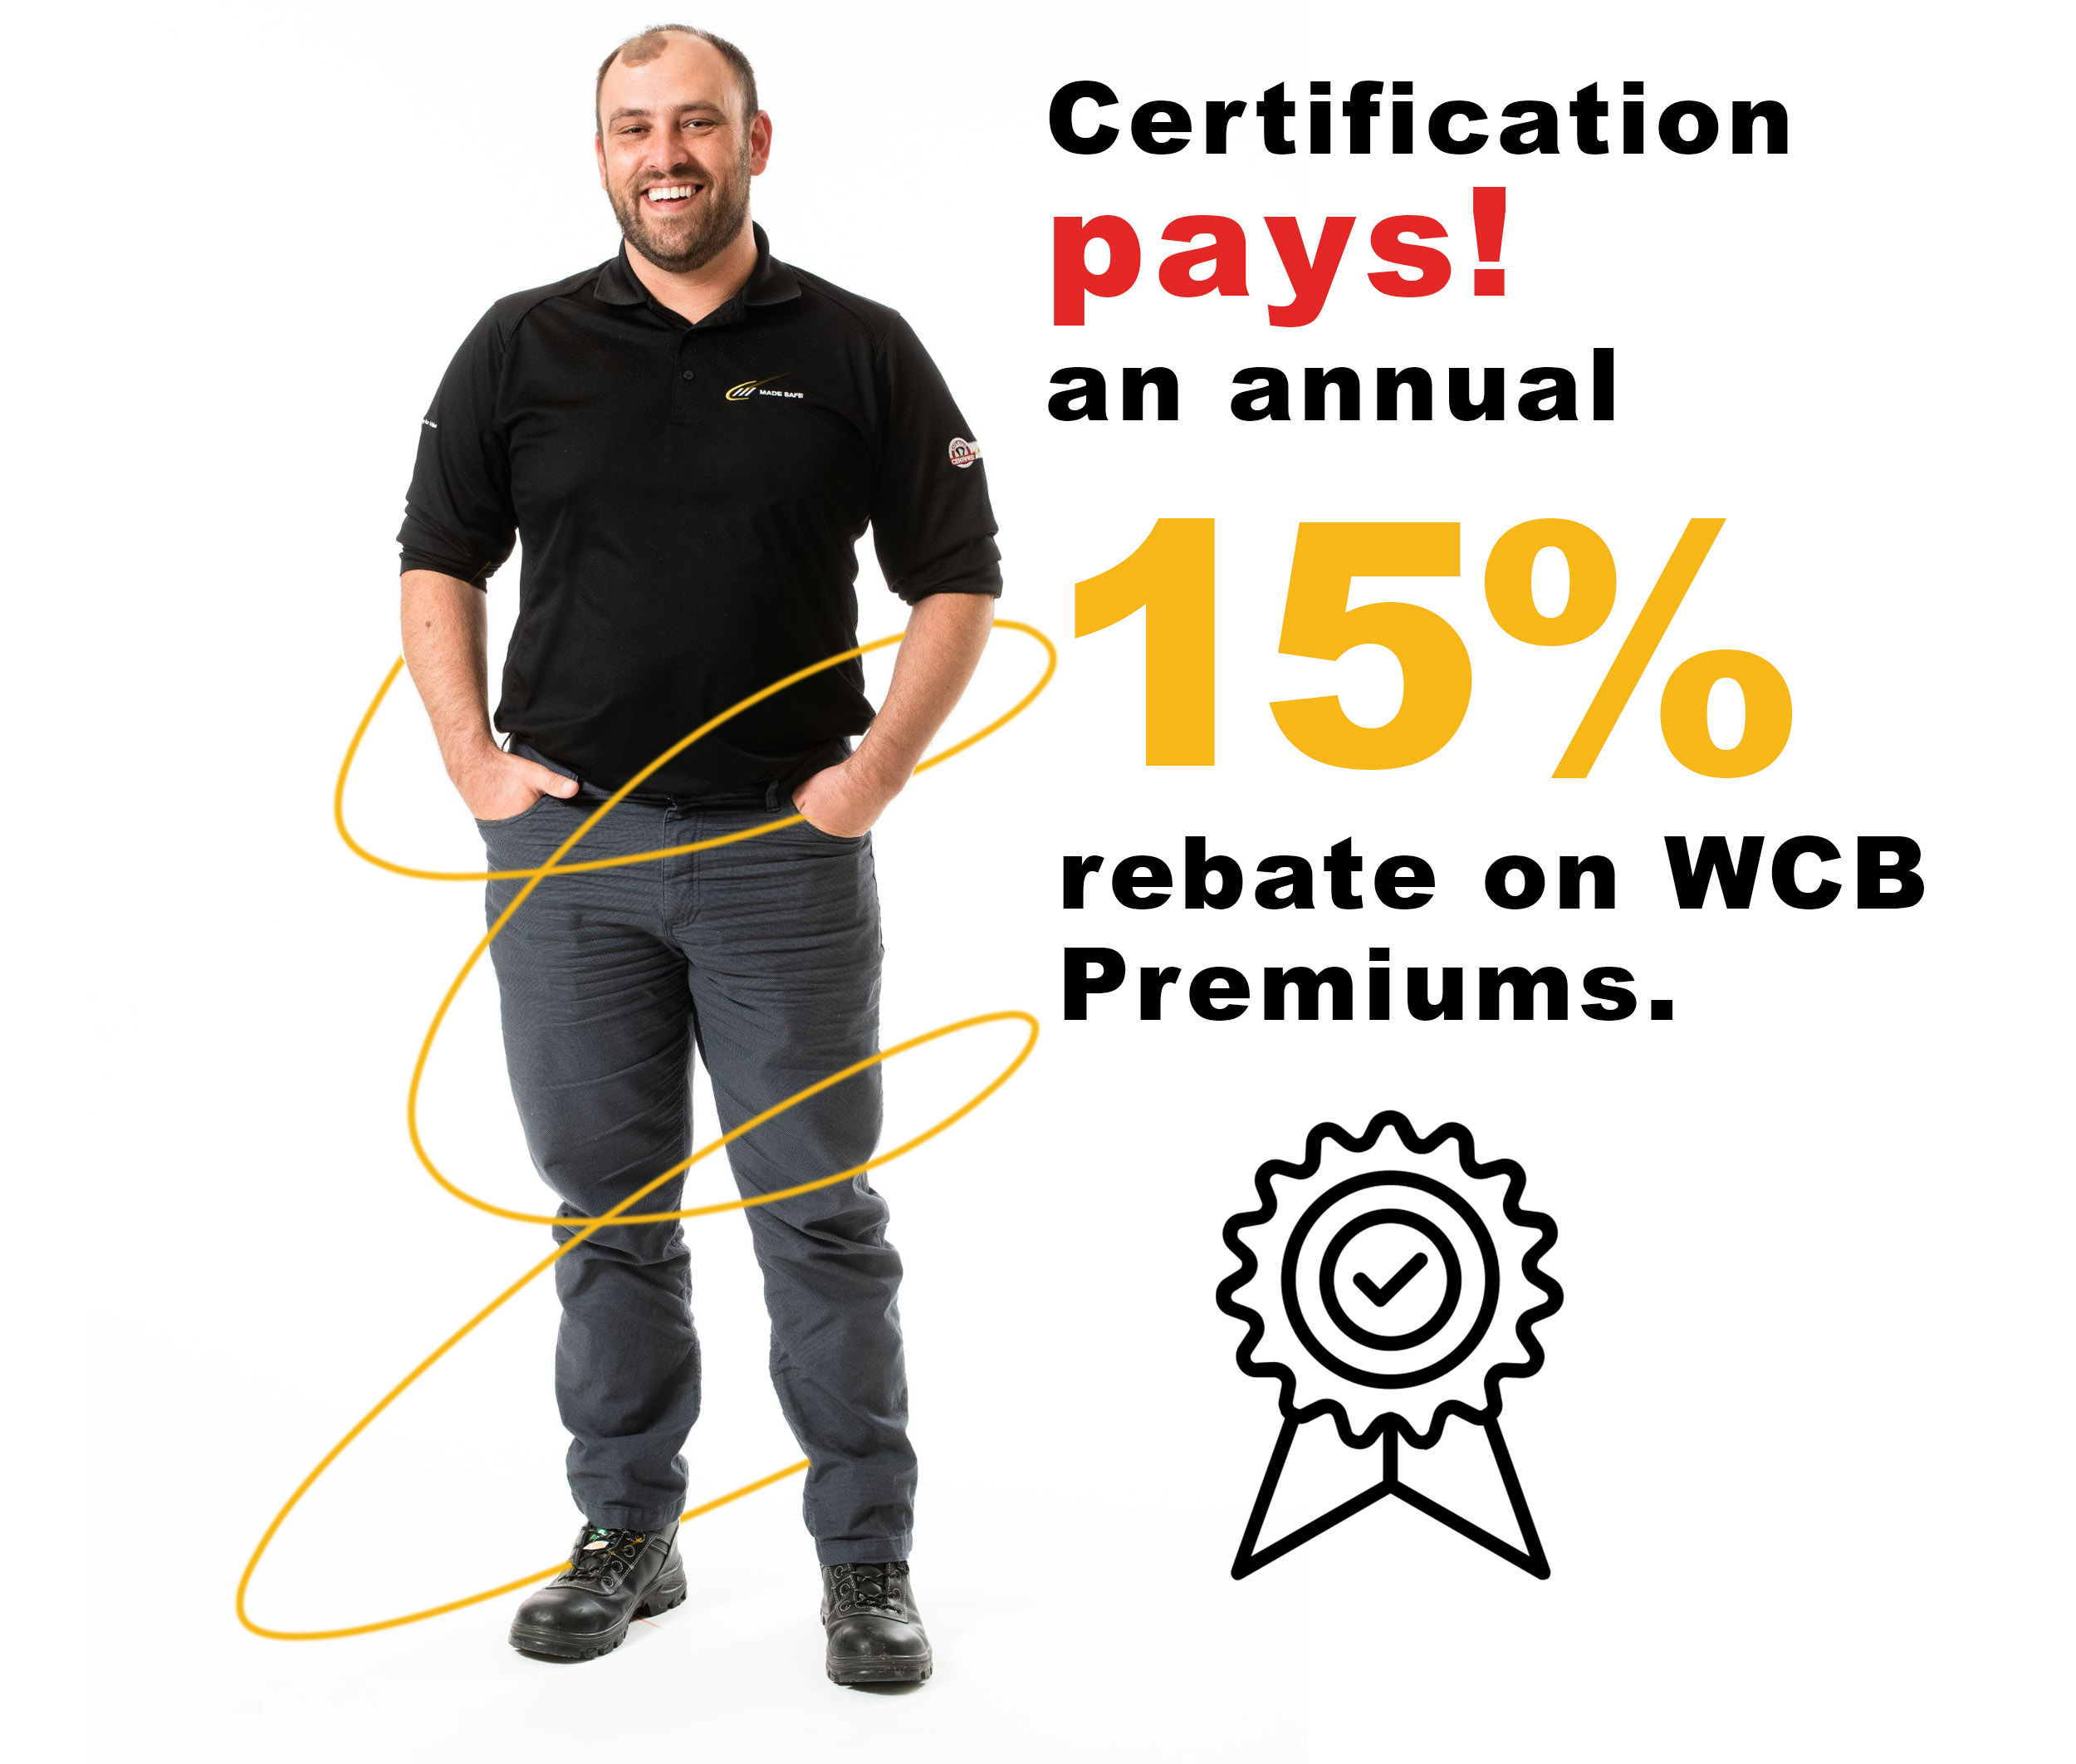 SAFE Work Certified by Made Safe is Manitoba’s safety and health certification standard for manufacturers.